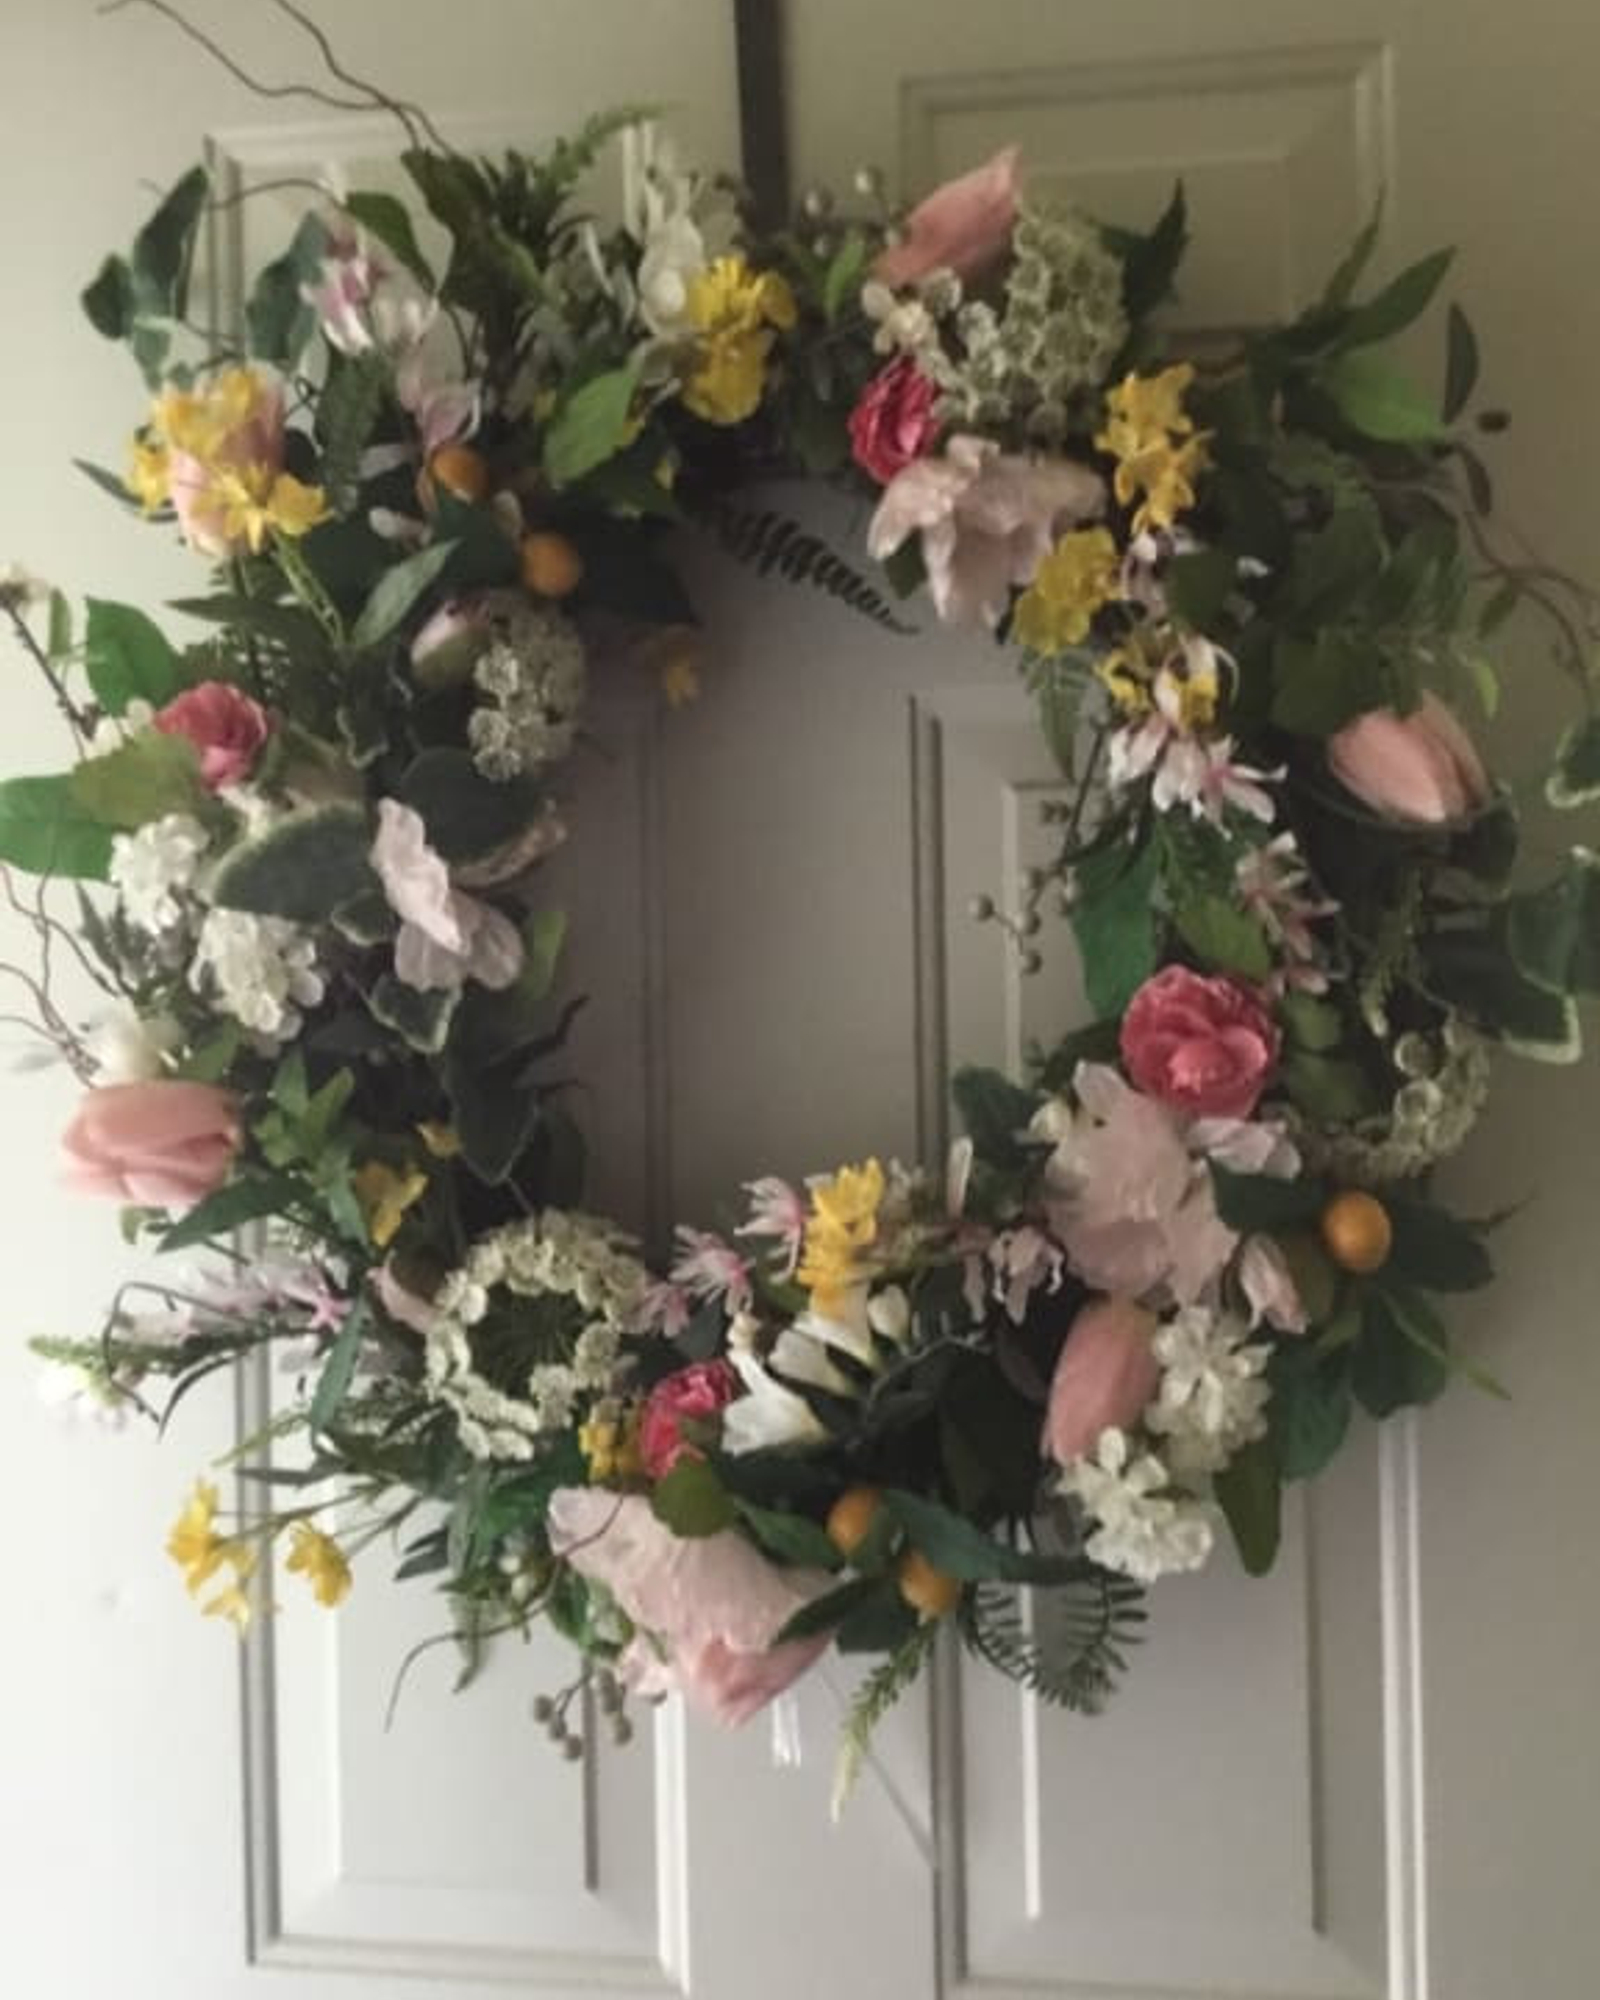 Some Beautiful Wreaths and Spring Decorating with Balsam Hill